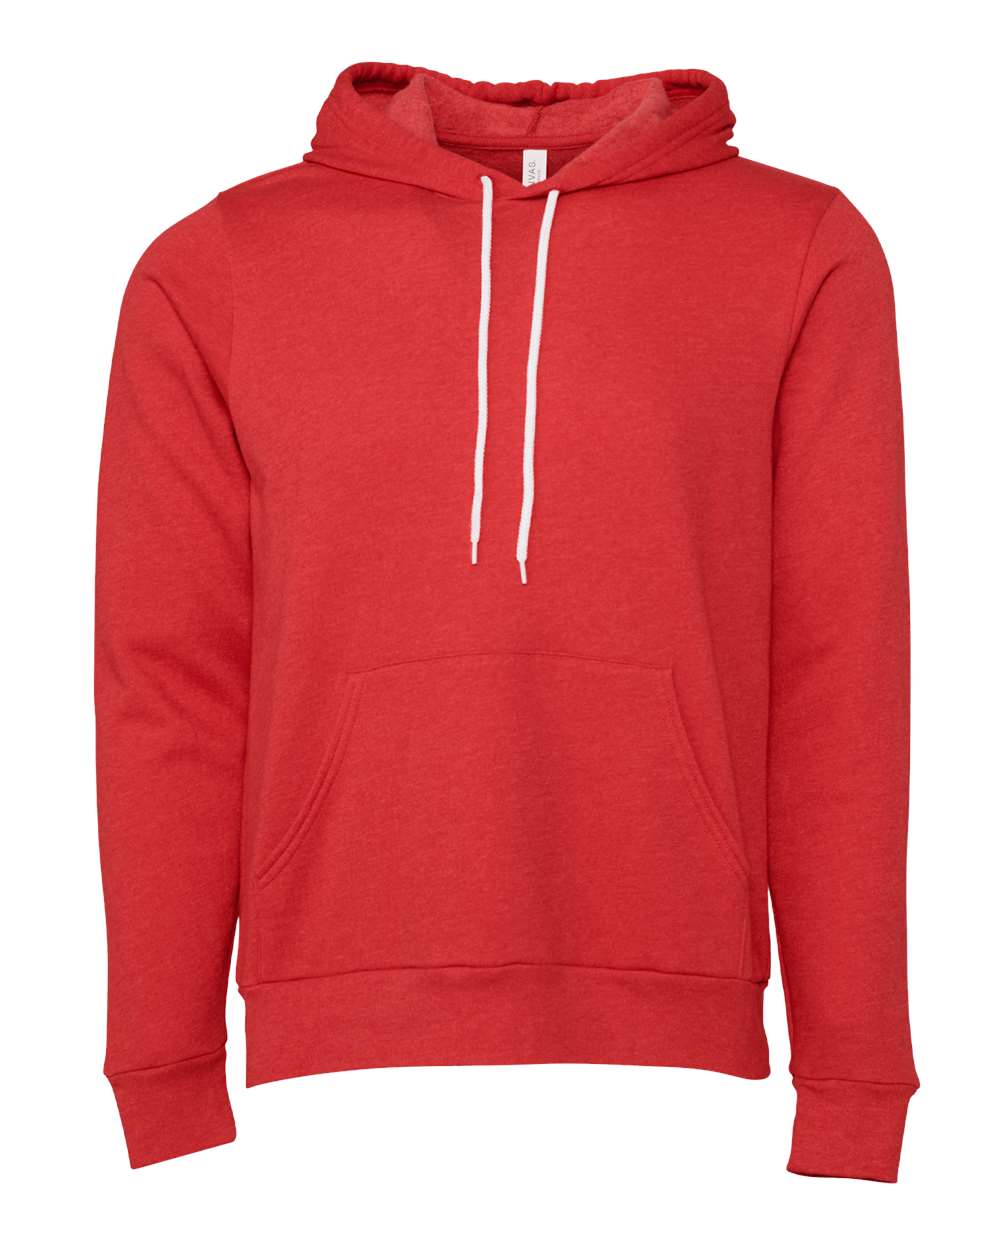 Bella + Canvas Hoodie (3719) in Heather Red